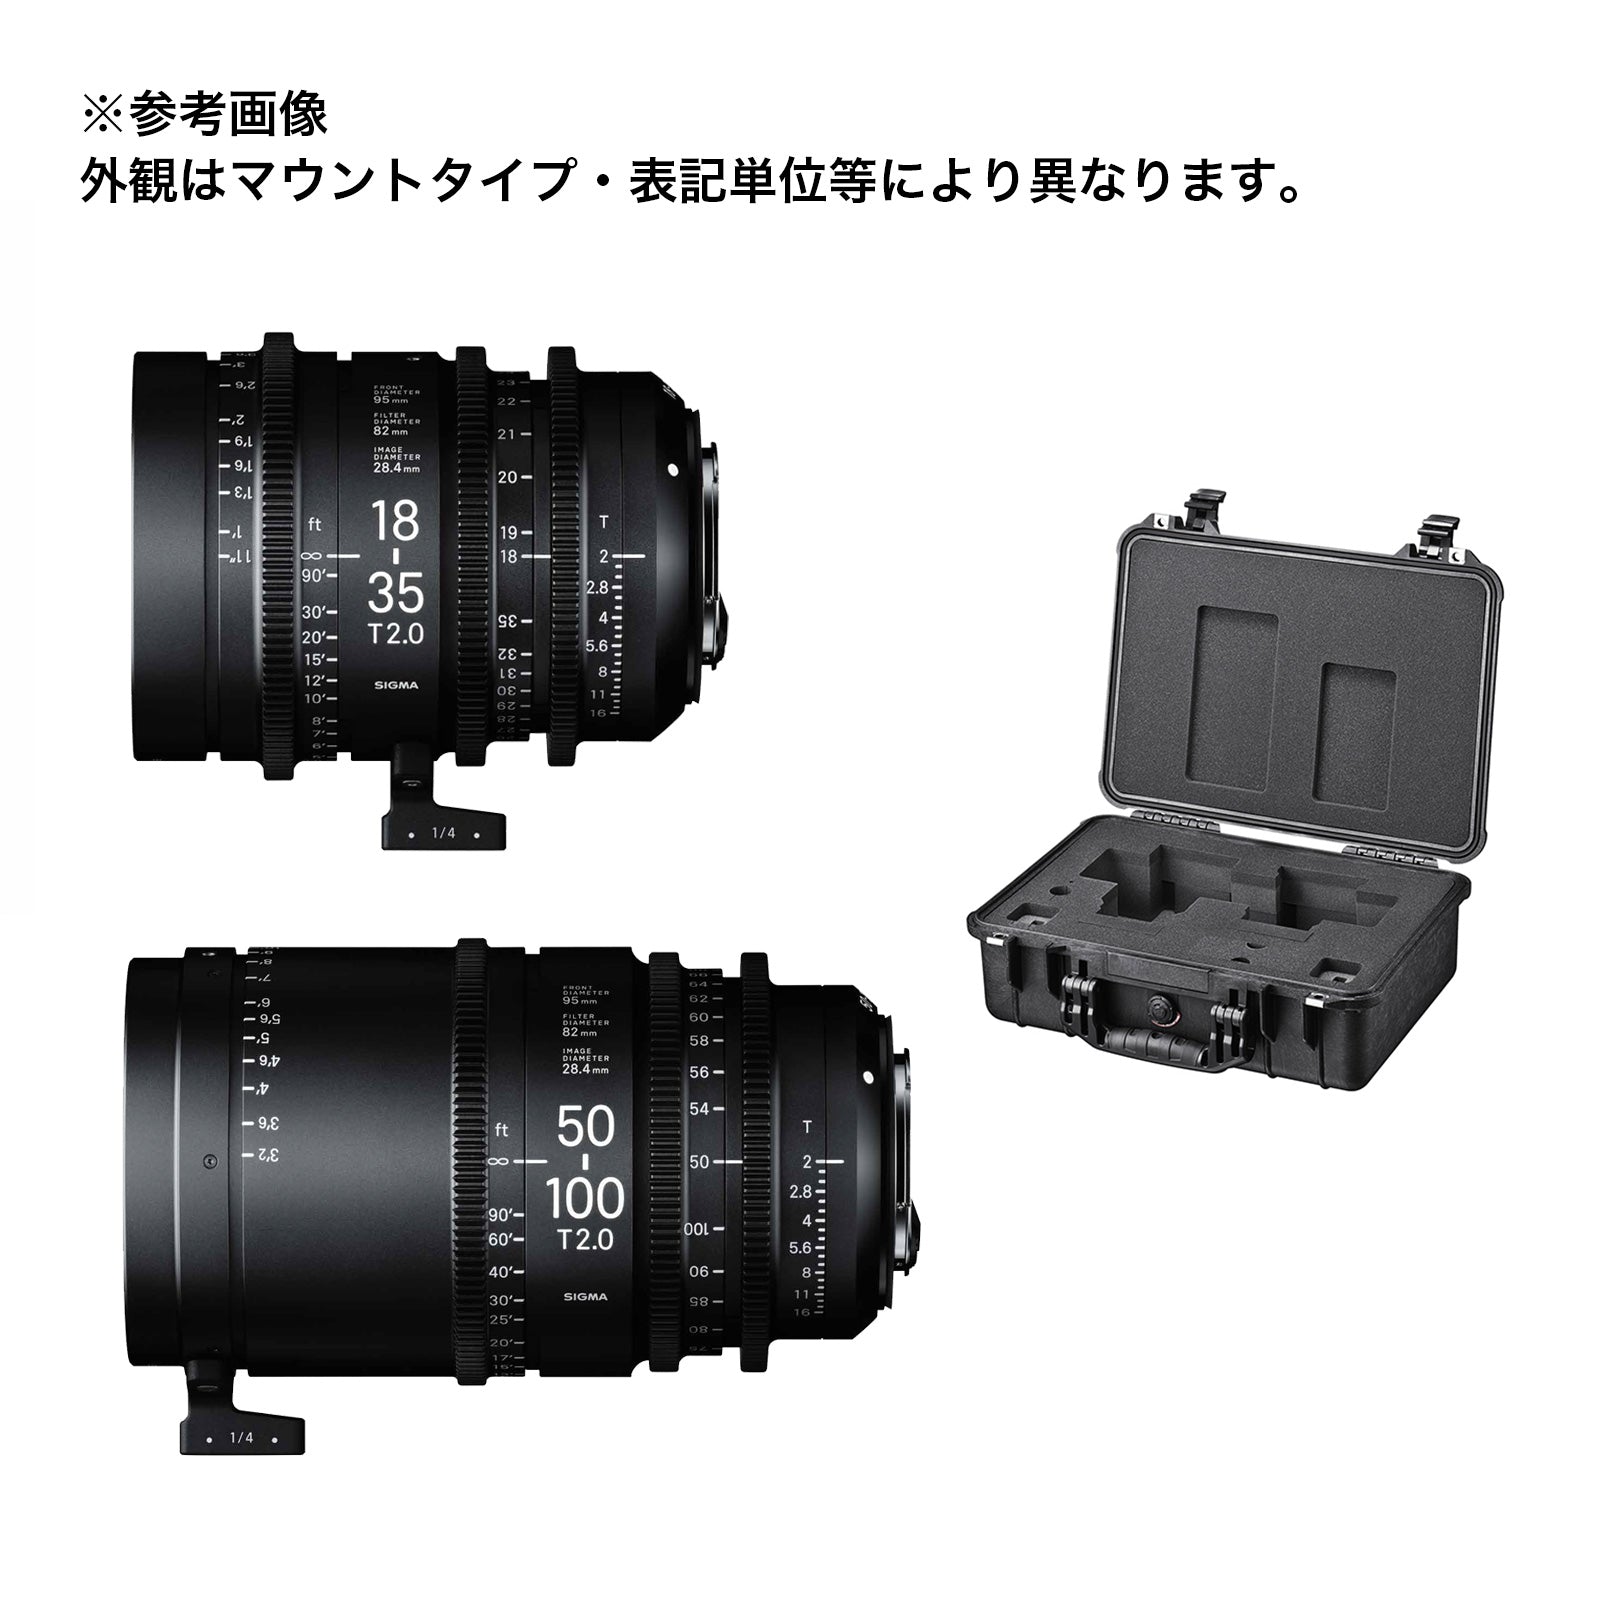 SIGMA(シグマ) CINE LENS High Speed Zoom Line 18-35mm & 50-100mm & PMC-001 kit / Eマウント フィート表記